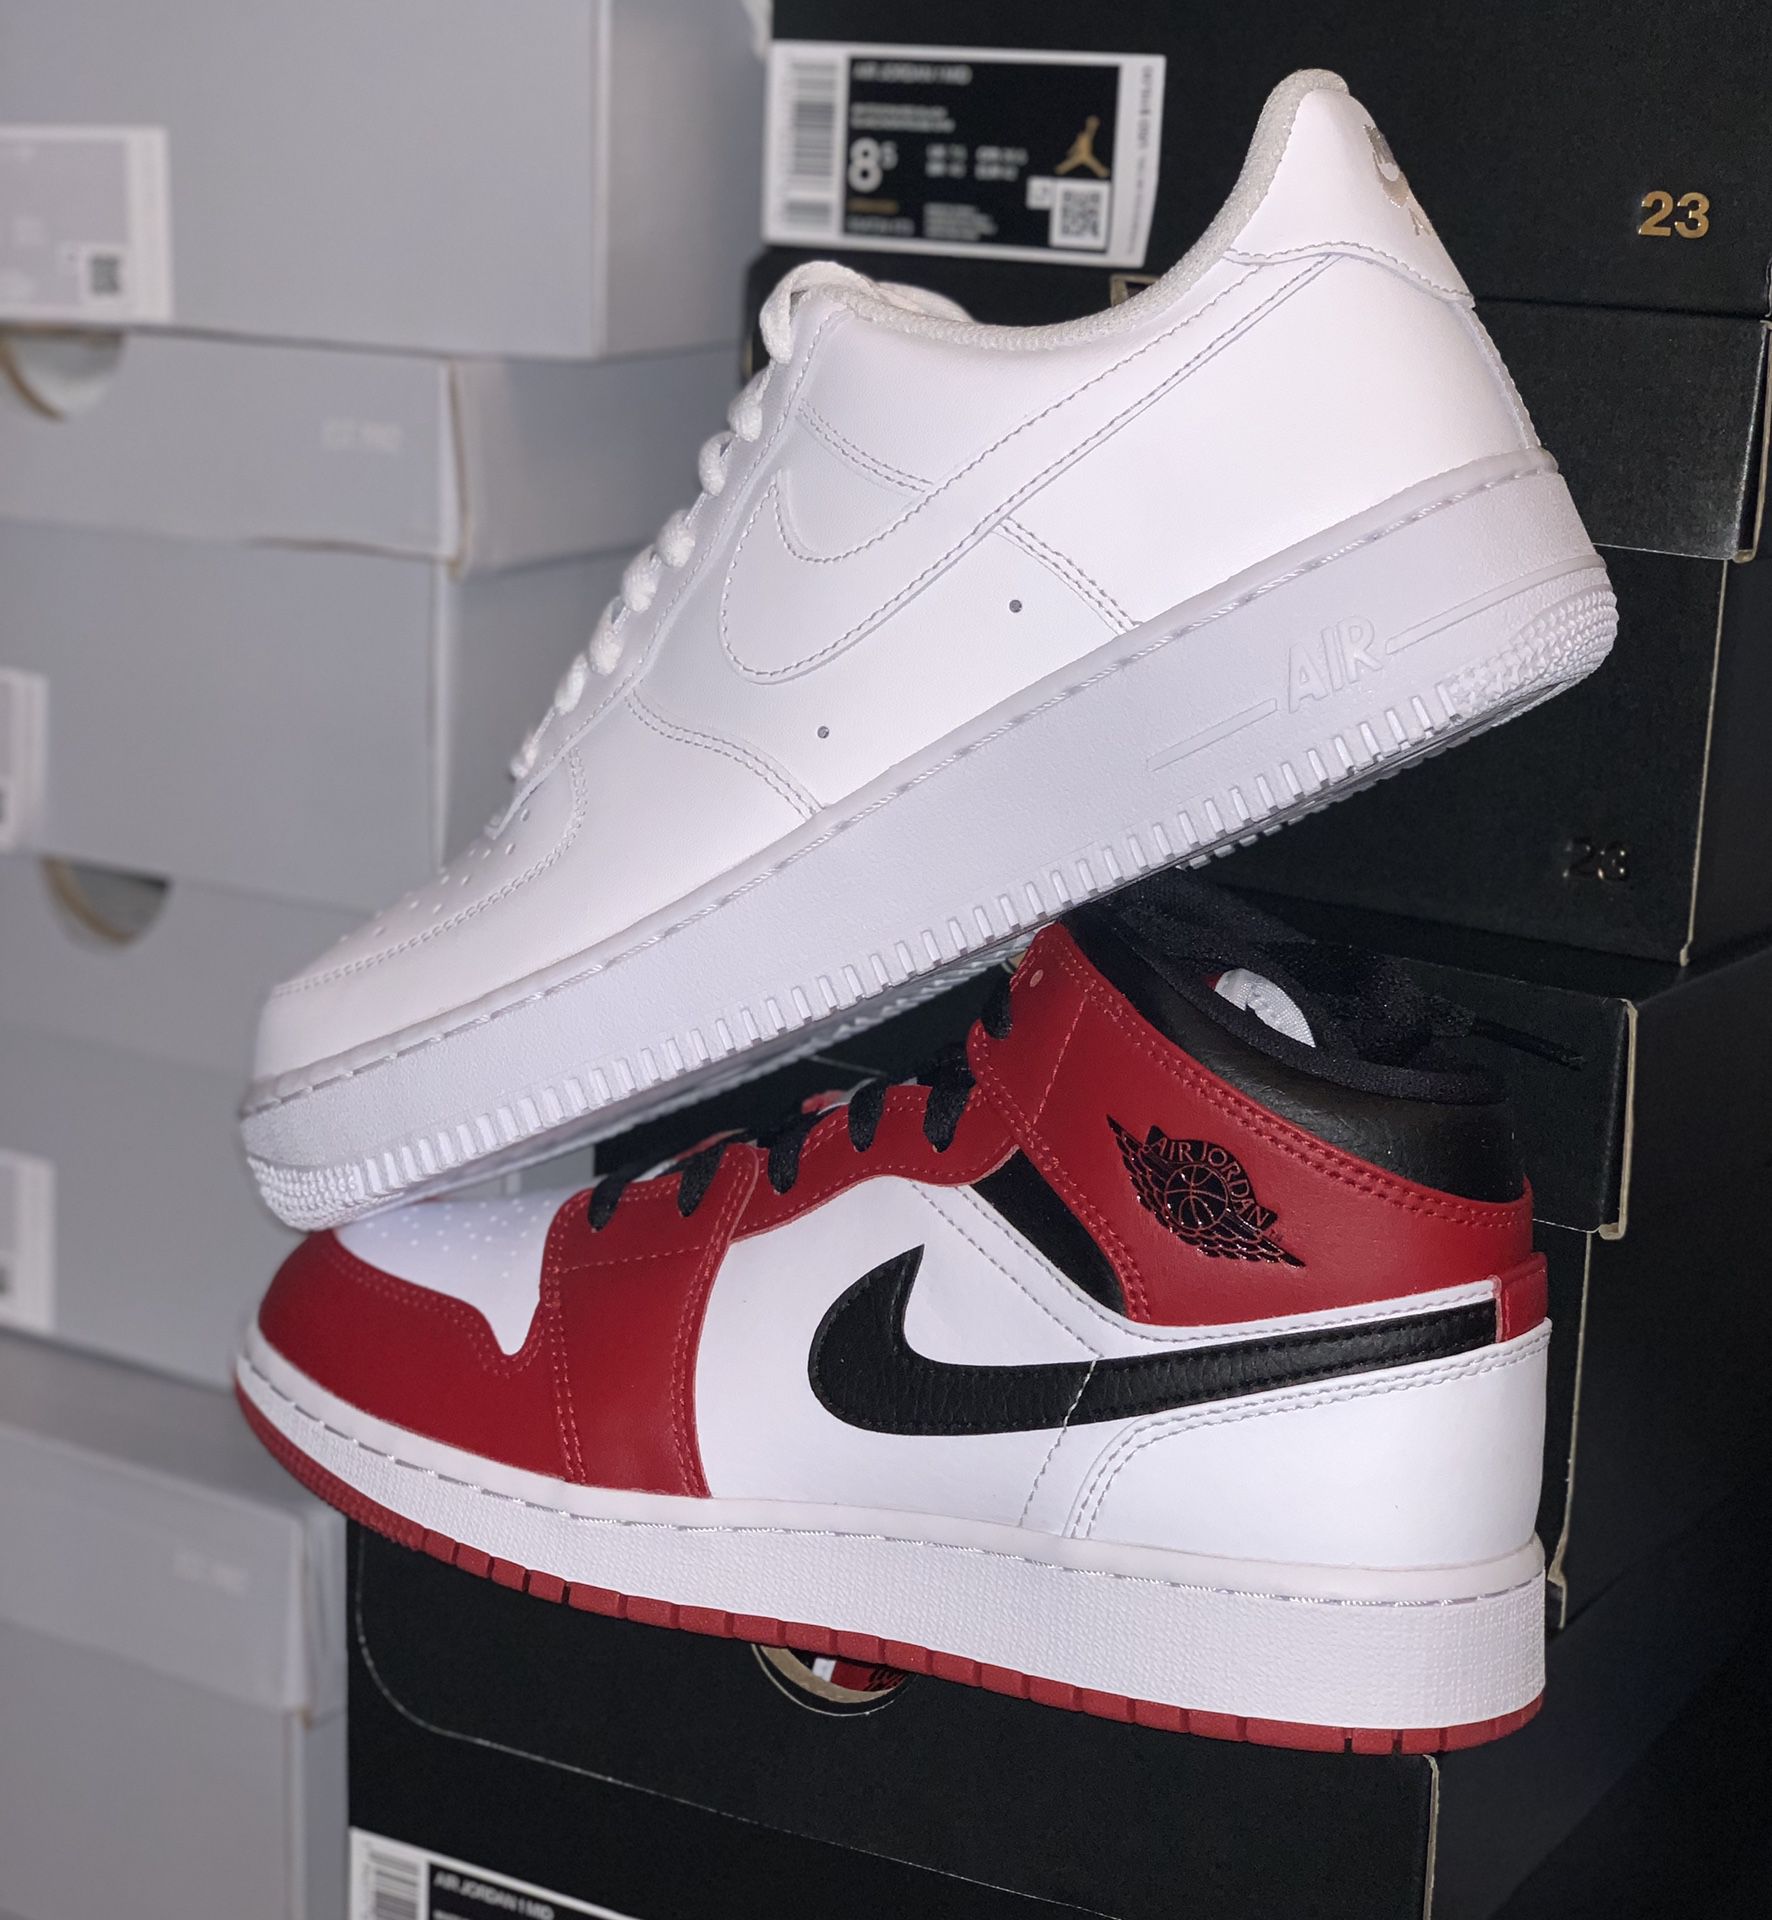 Brand New Jordan 1s and Air Force 1s